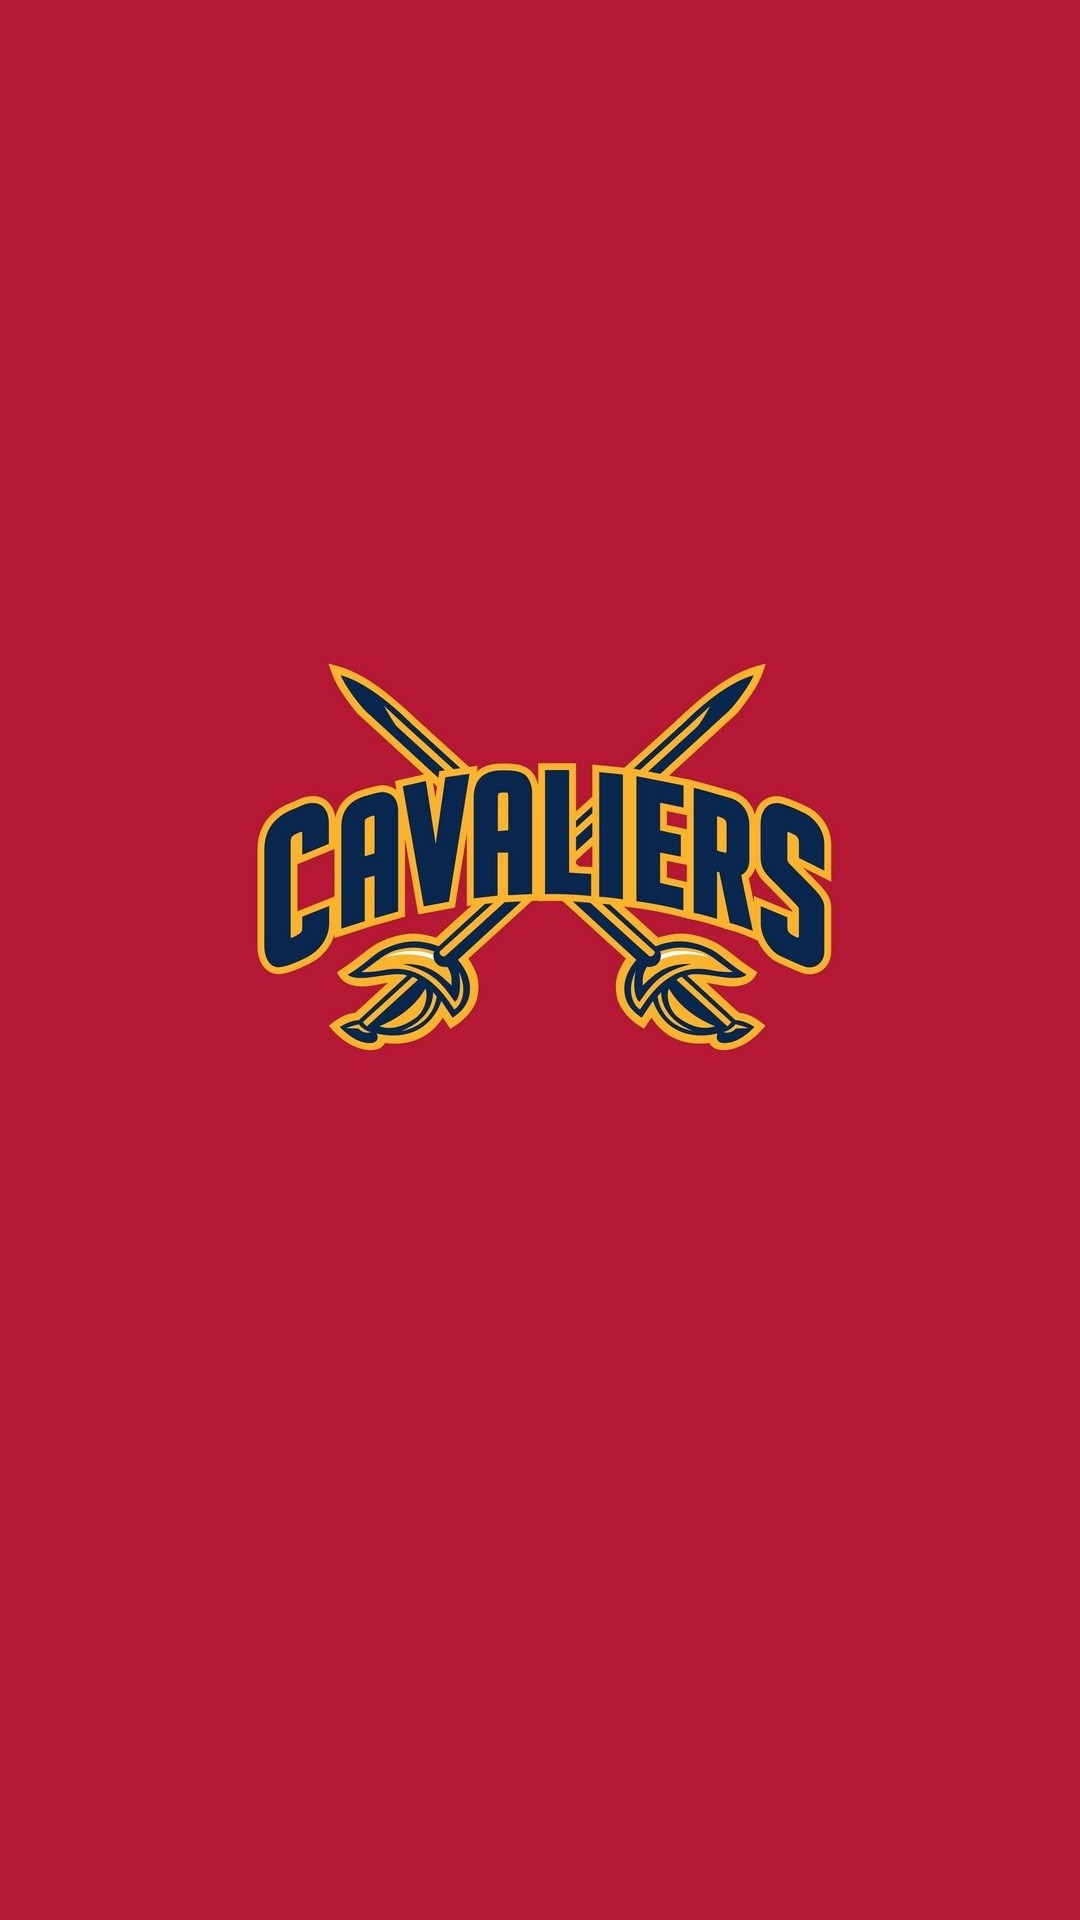 1080x1920 Cleveland Cavaliers Mobile Wallpaper resolution 